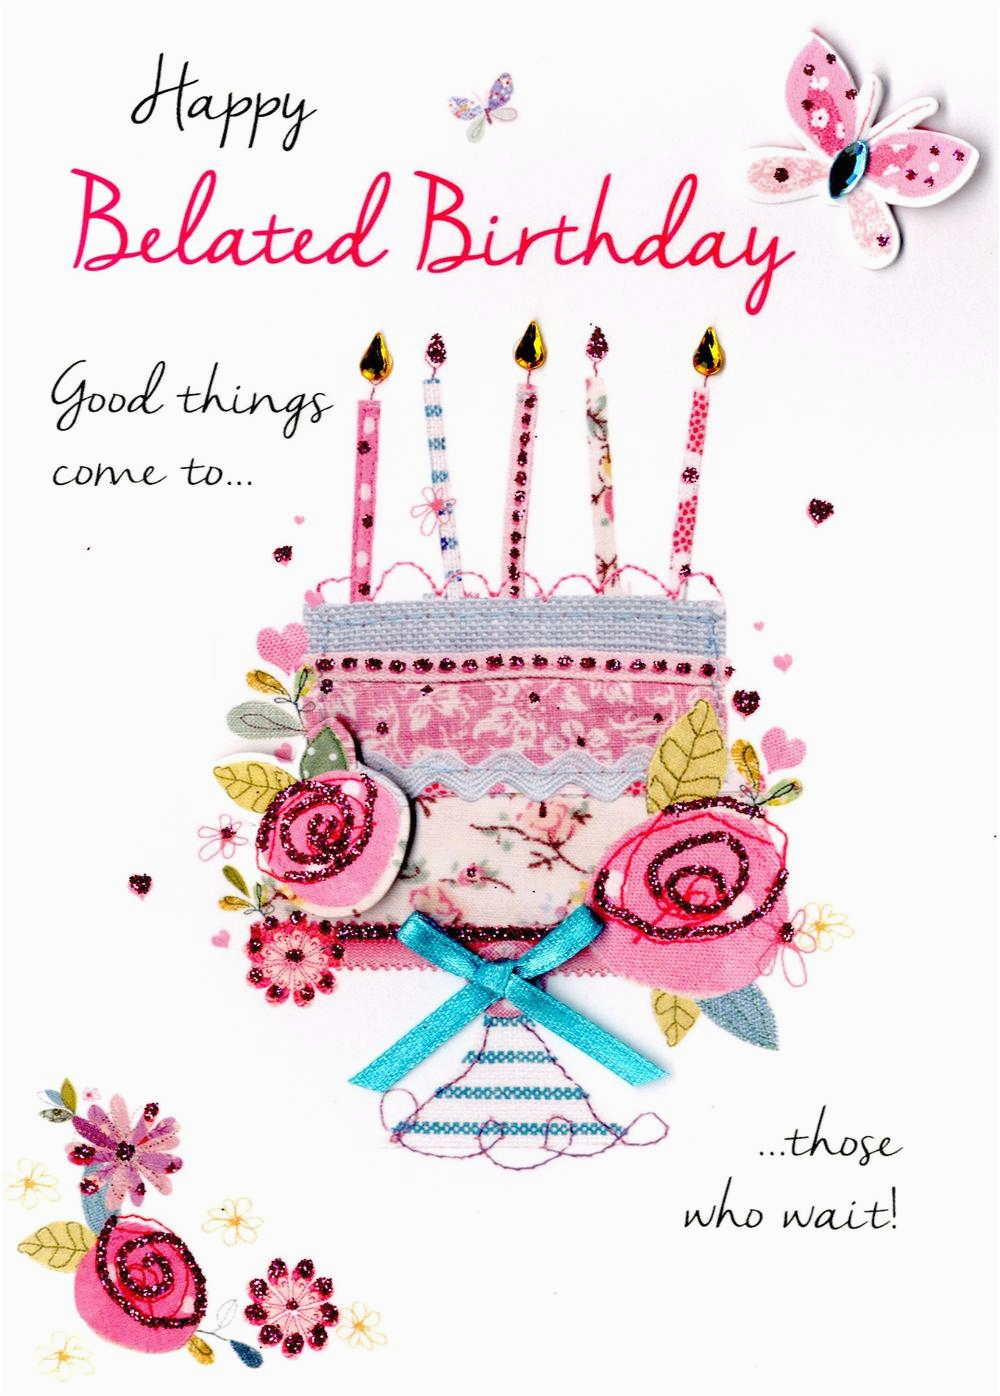 What to Say On A Happy Birthday Card Happy Belated Birthday Greeting Card Cards Love Kates